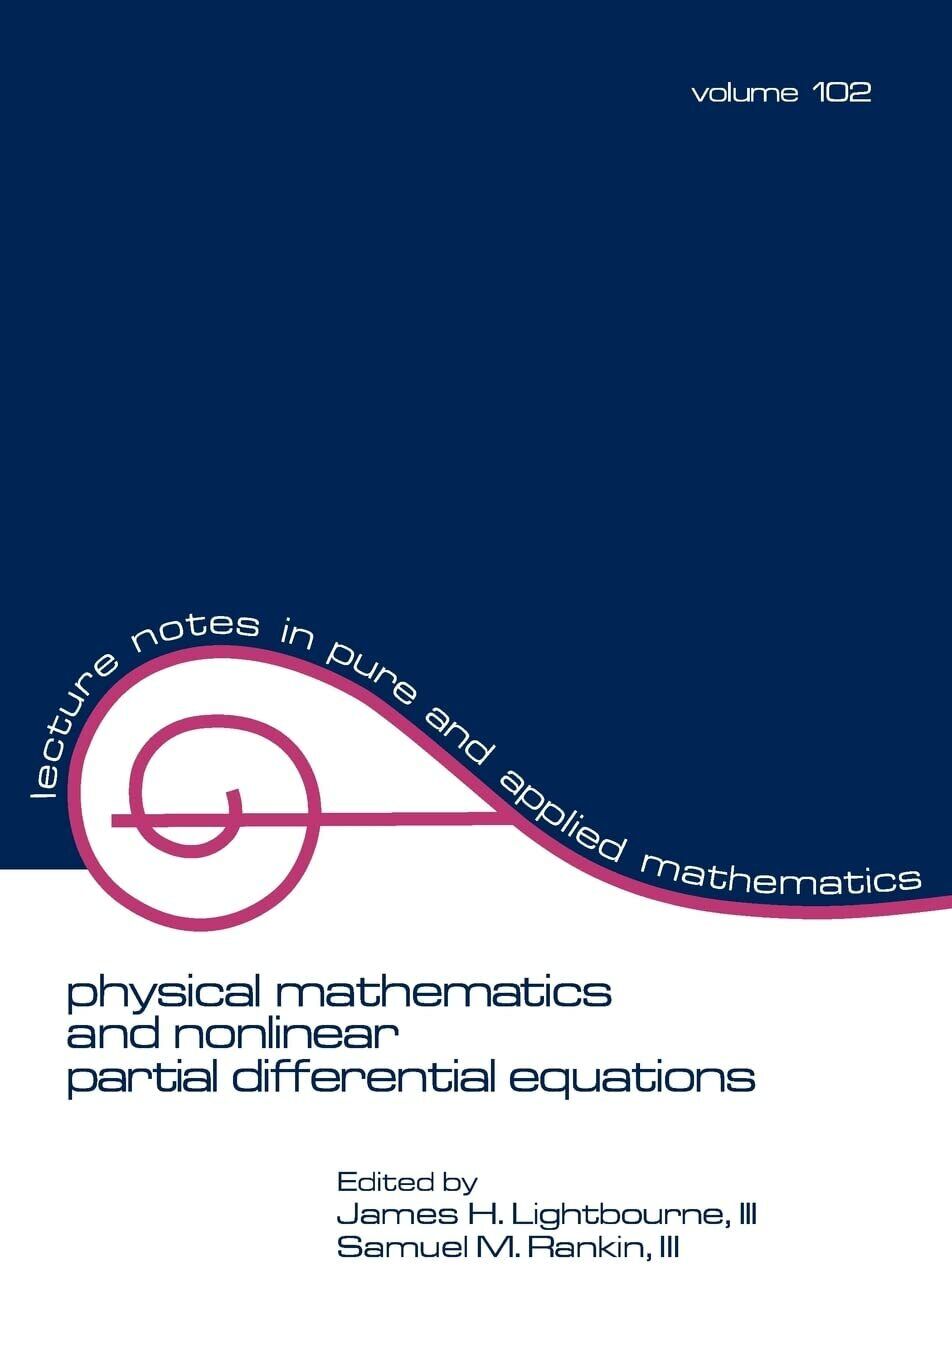 Physical Mathematics and Nonlinear Partial Differential Equations - CRC, 1985